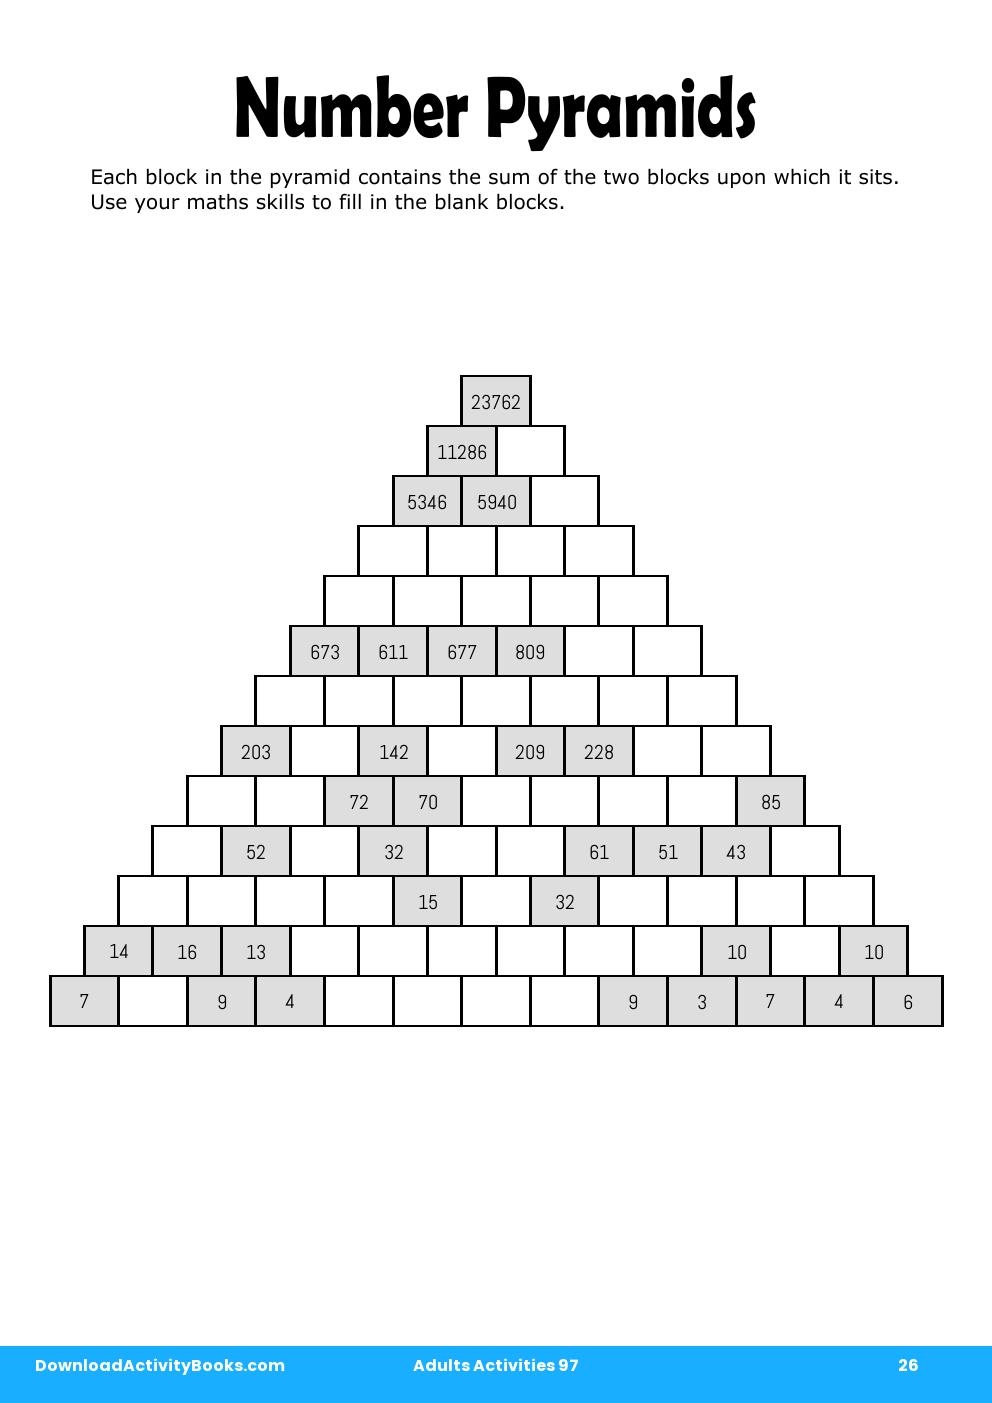 Number Pyramids in Adults Activities 97